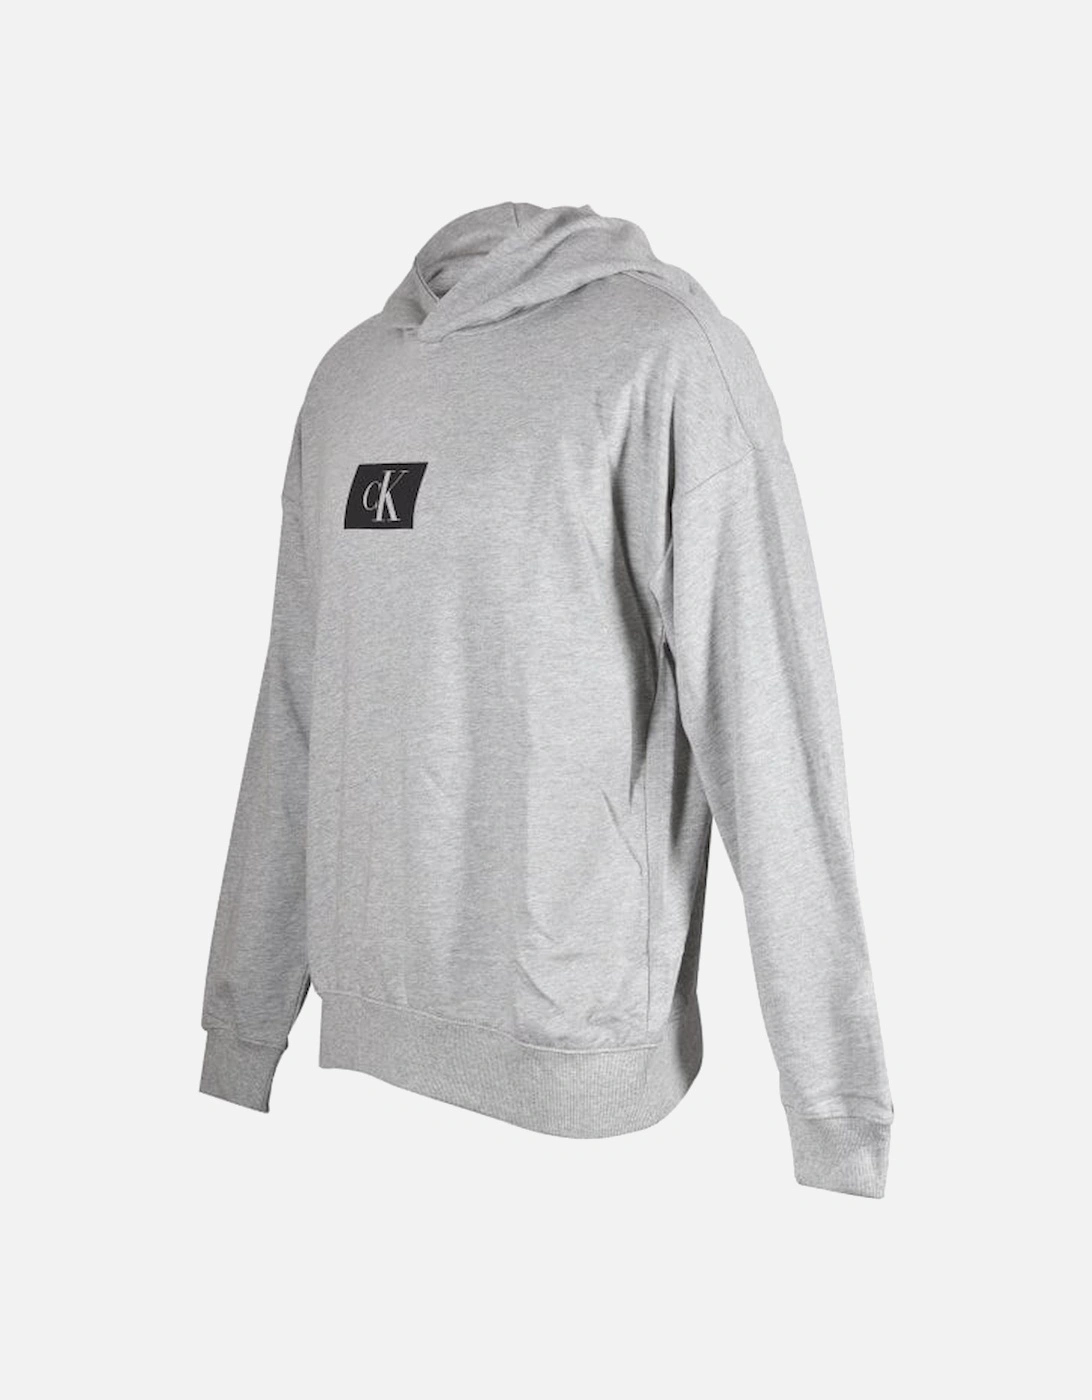 CK 96 French Terry Hoodie, Grey Heather